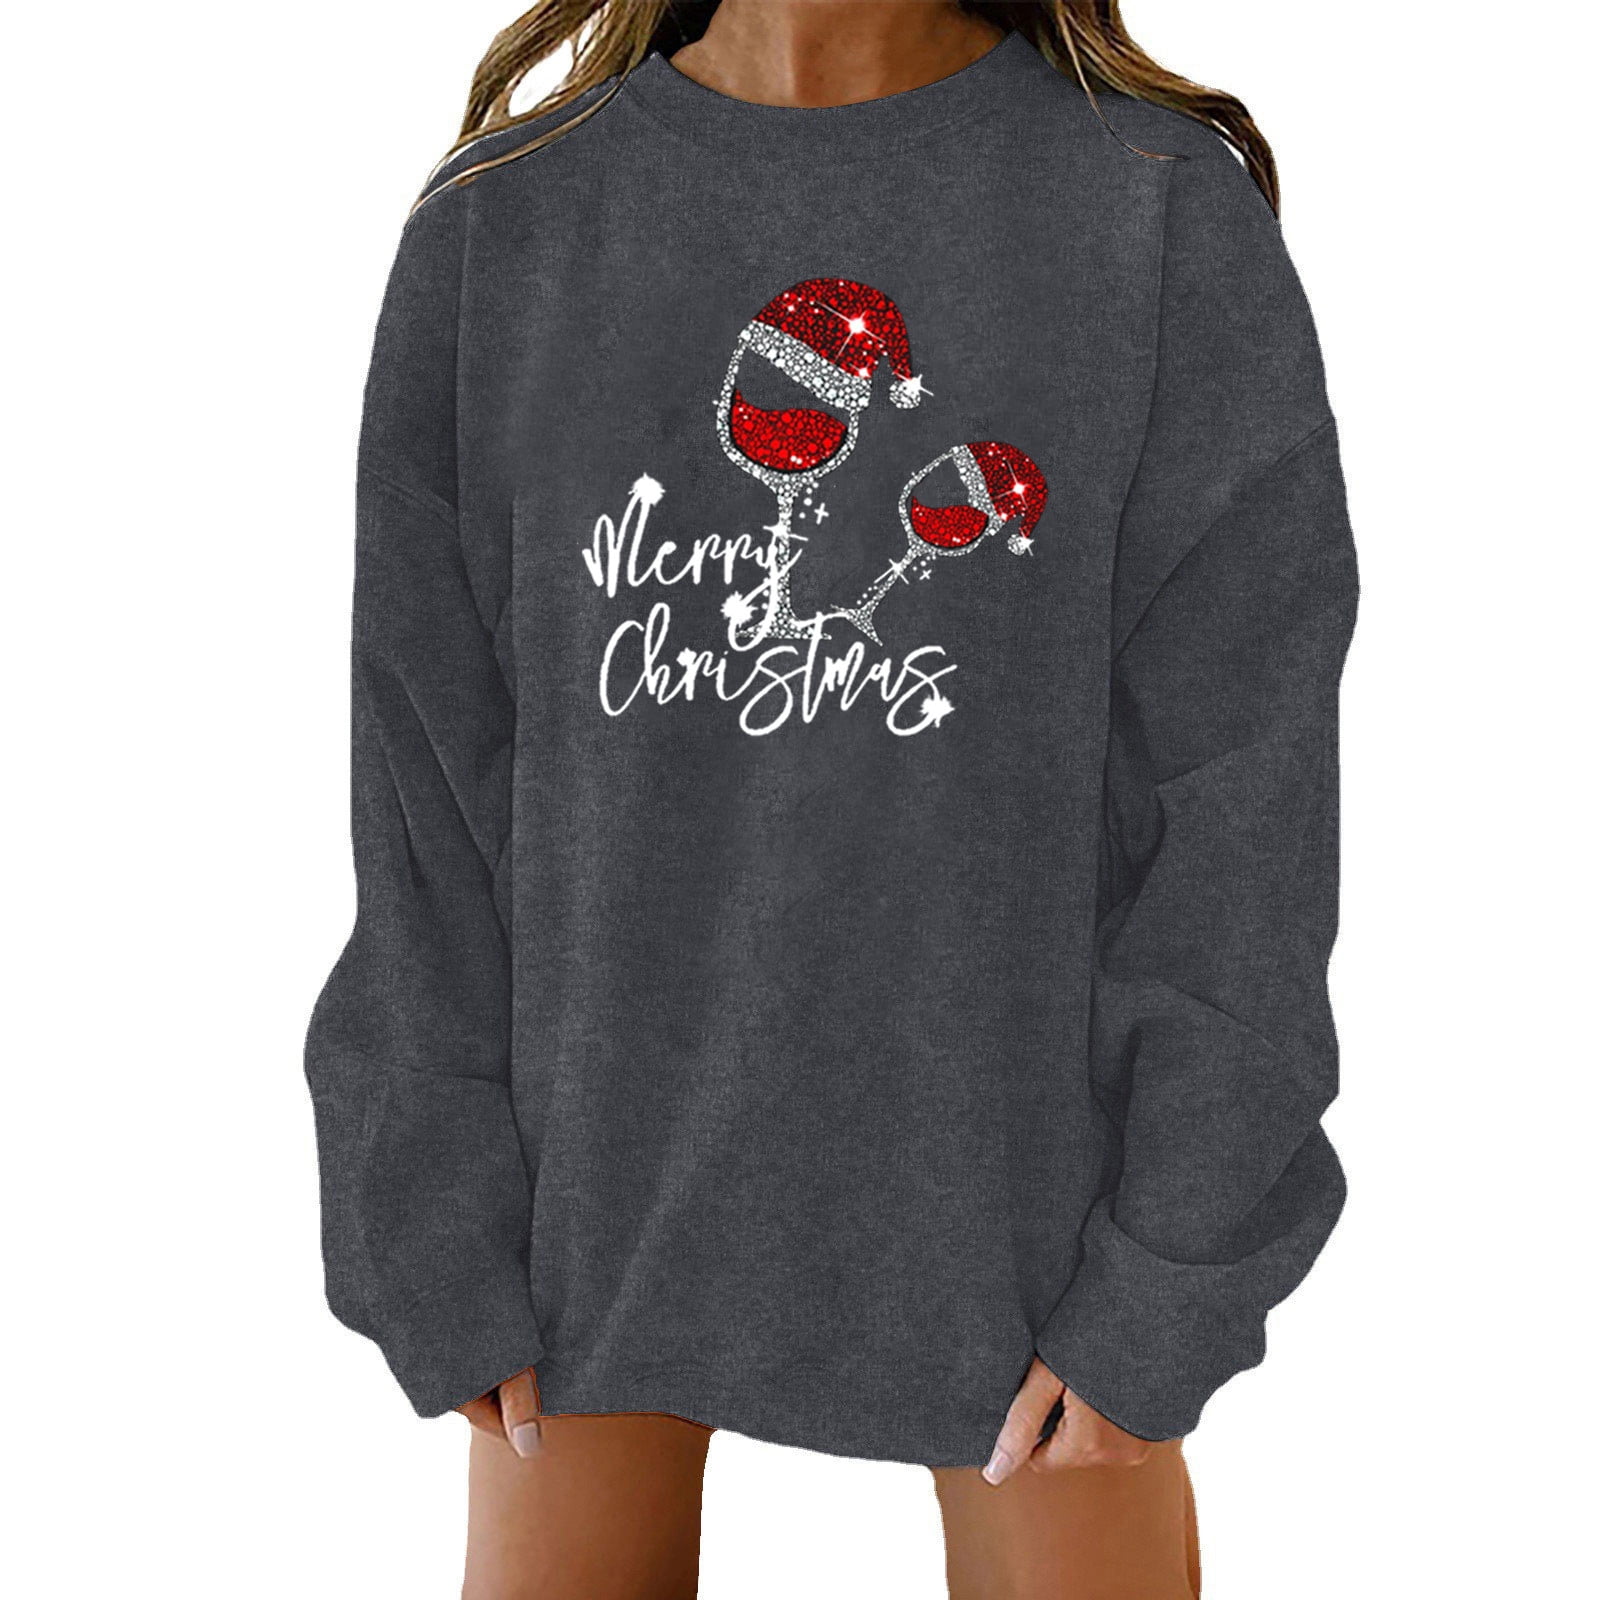 Funny Christmas Shirts for Women Sleeve Sweatshirt plus Size 3x Shirts for  Women Casual Fall Tee plus Size (Black, XL) at  Women's Clothing store